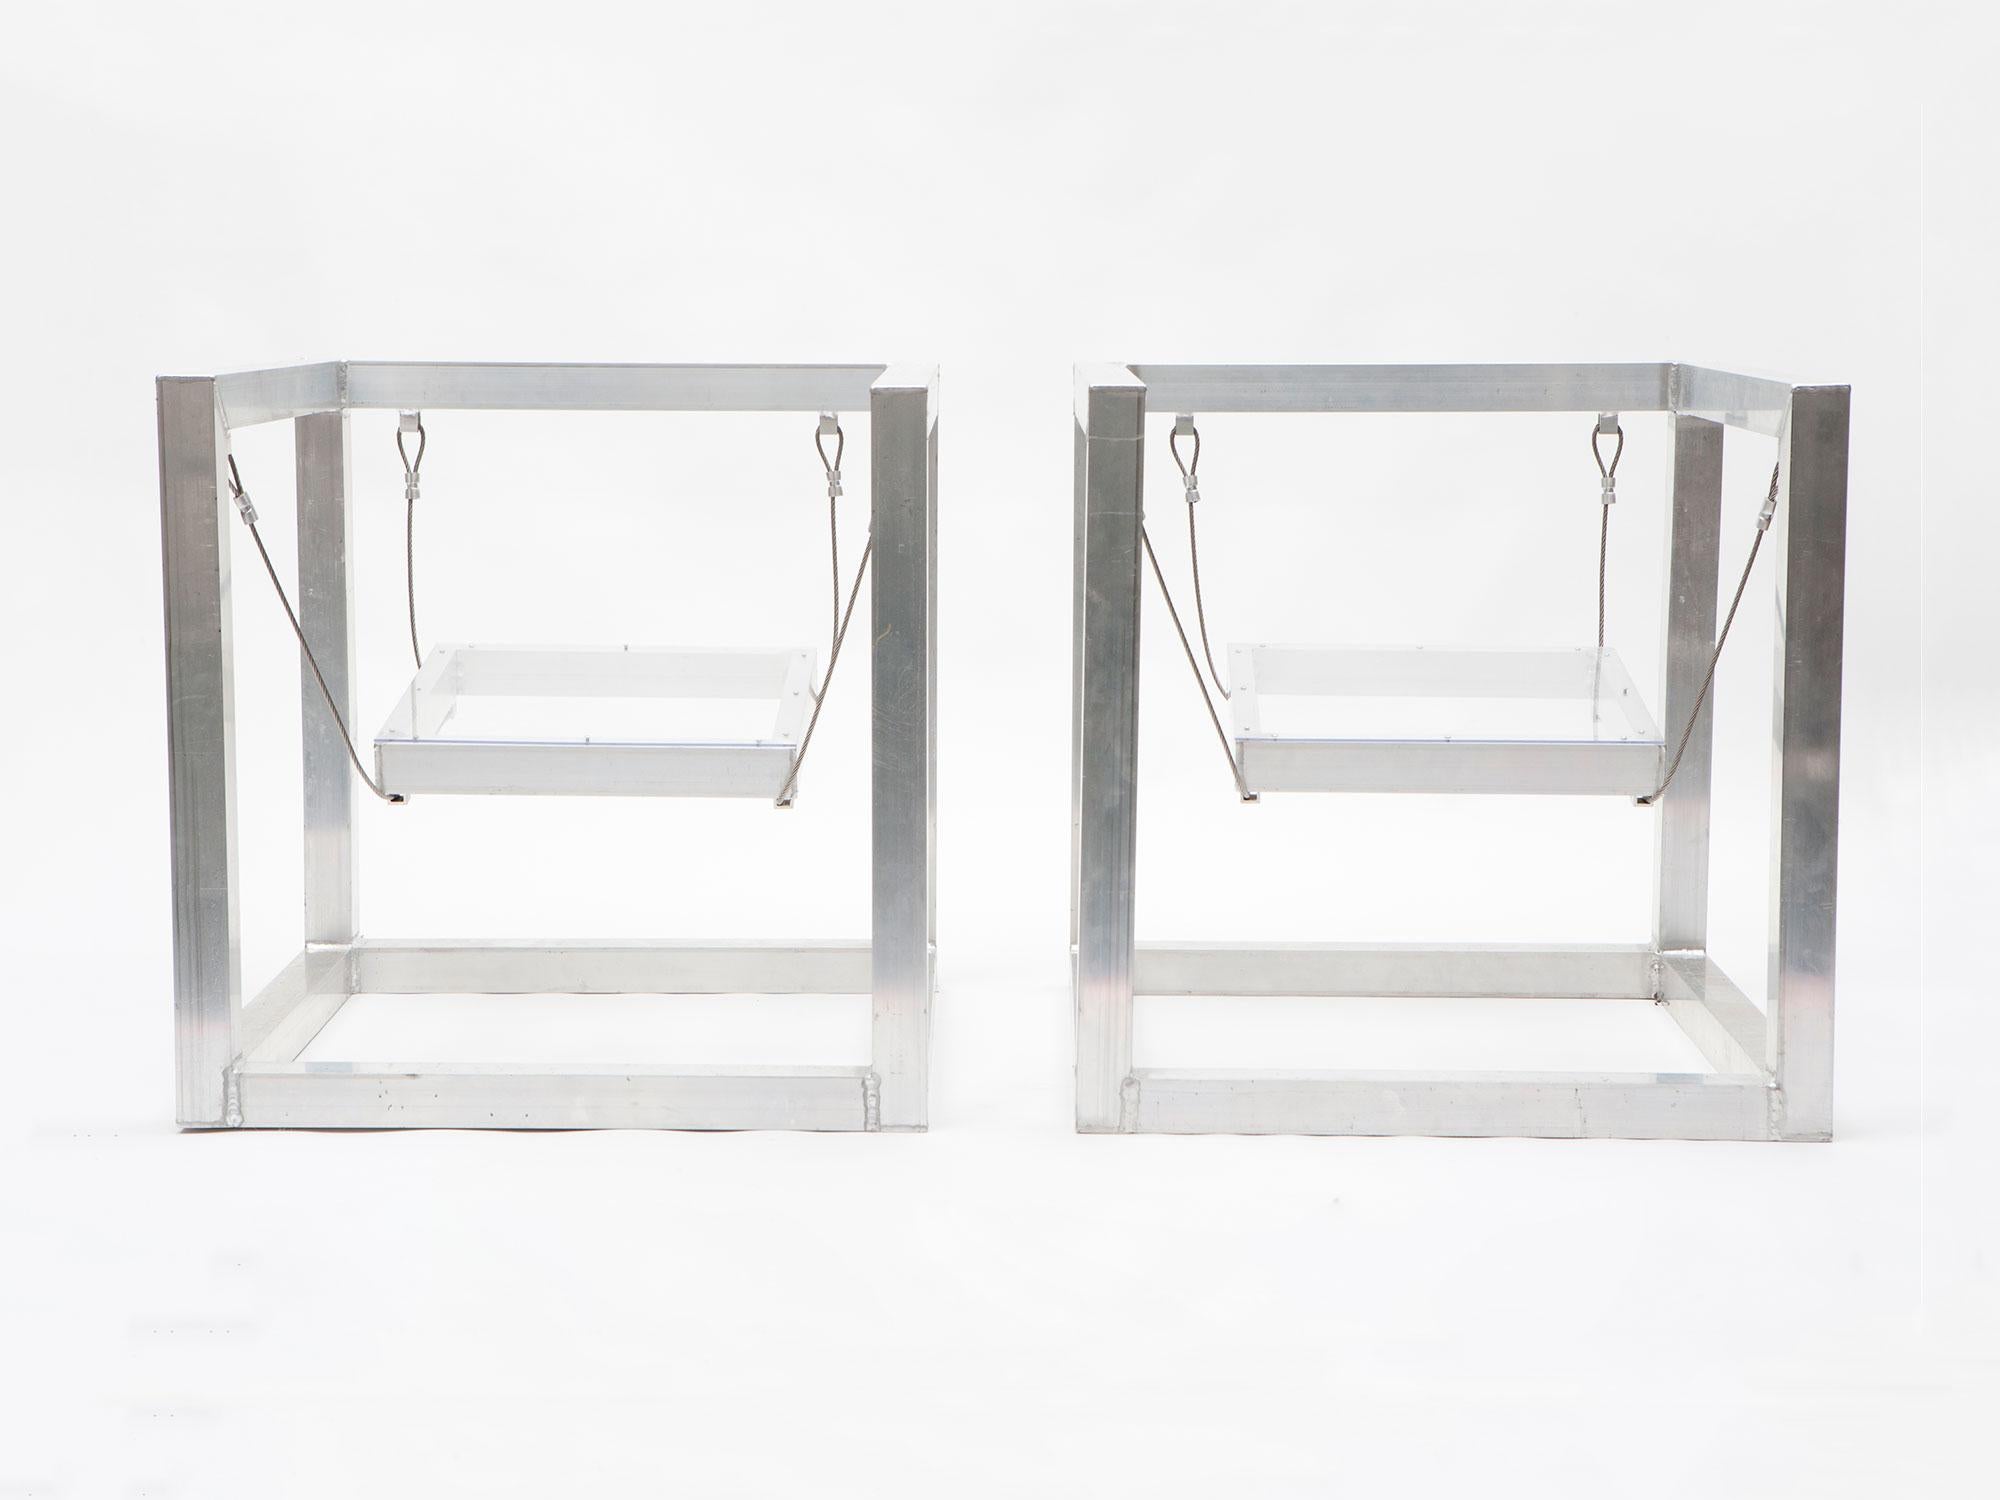 Pair of aluminum and plexiglass armchairs by RO/LU with hanging seats. Created during RO/LU's residency at the Rauschenberg Foundation, and made by one of Rauschenberg's original fabricators. This pair is unique.